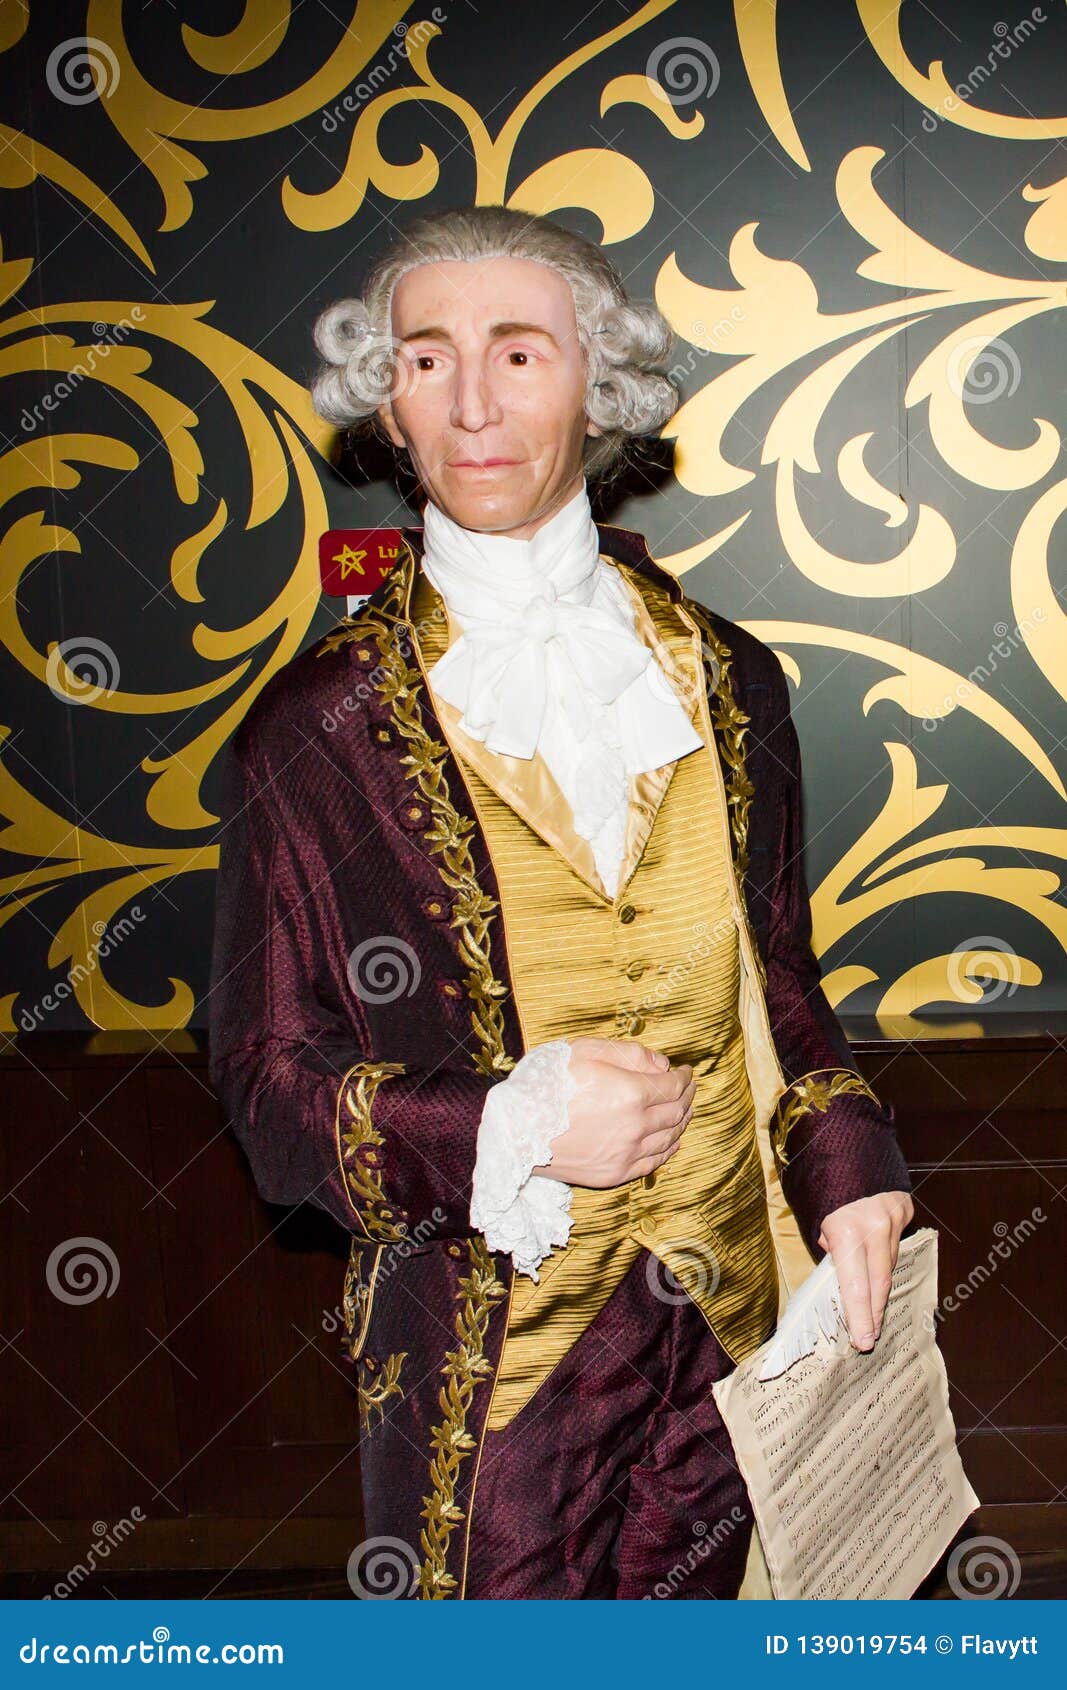 243 Haydn Photos Free Royalty Free Stock Photos From Dreamstime